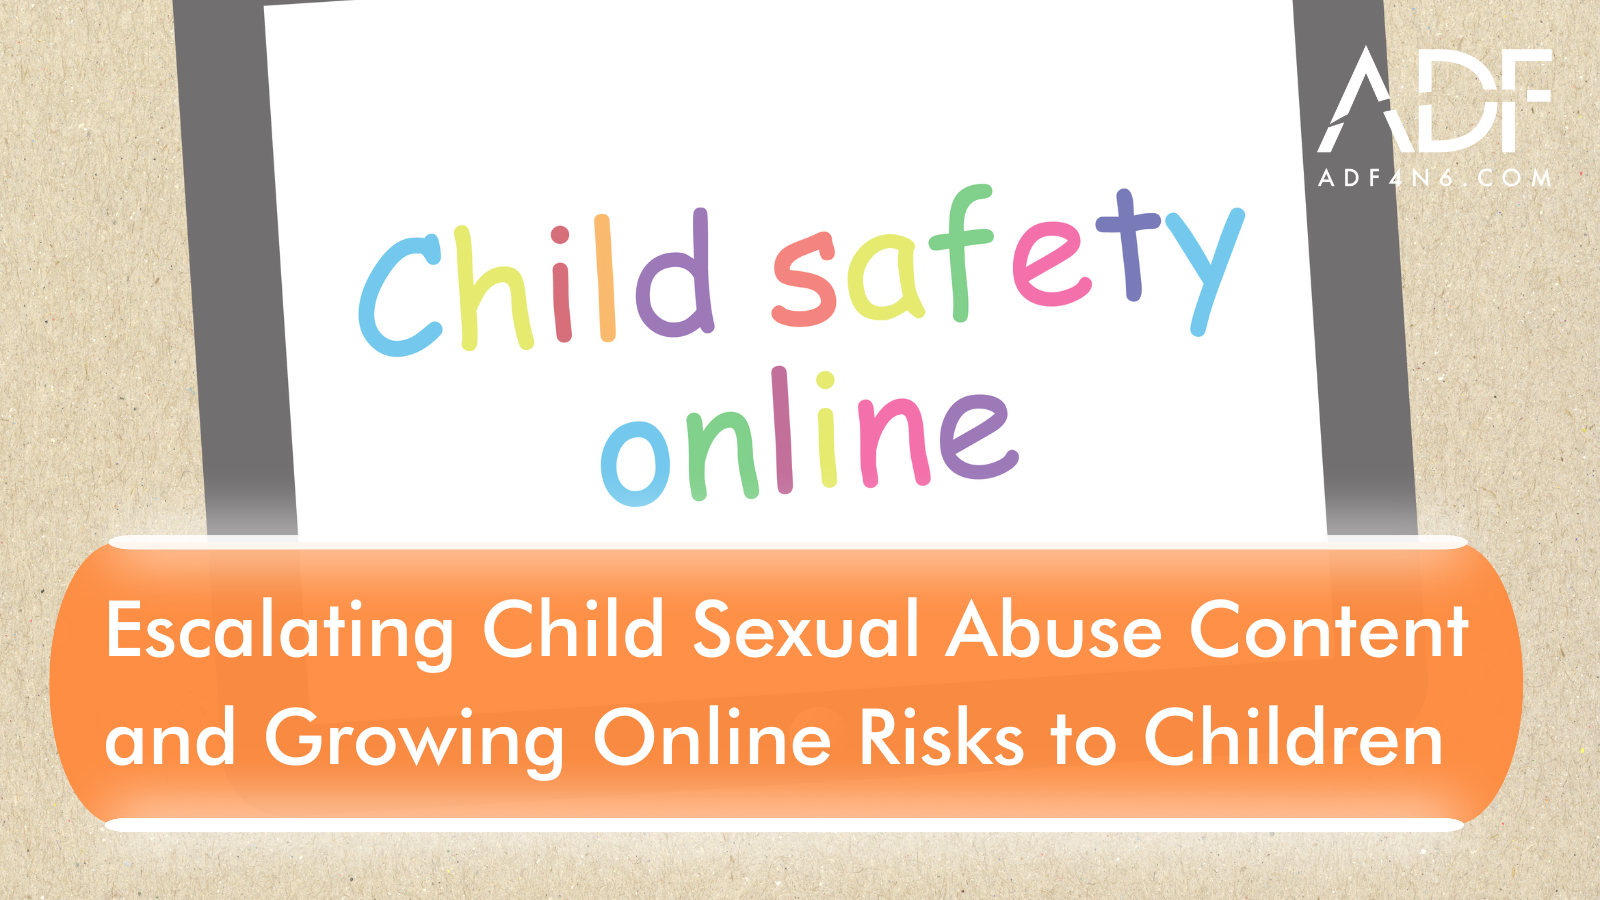 Escalating CSAM Content and Growing Online Risks to Children